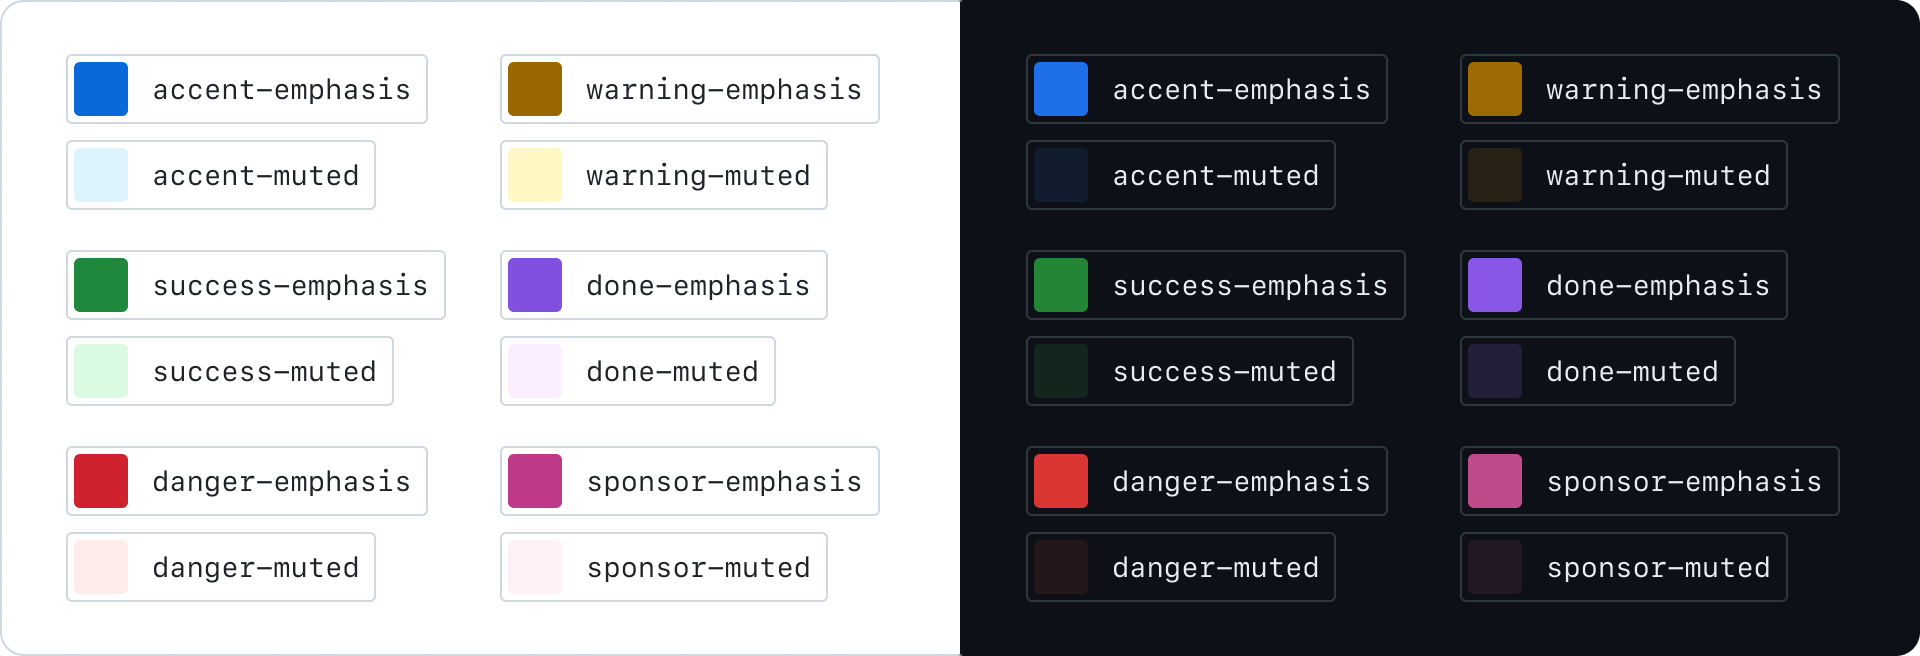 Overview of GitHub UI color roles in light and dark themes. Each theme displays labeled color swatches for: 'accent-emphasis' in blue, 'accent-muted' in light blue, 'success-emphasis' in green, 'success-muted' in light green, 'danger-emphasis' in red, 'danger-muted' in light red, 'warning-emphasis' in yellow, 'warning-muted' in light yellow, 'done-emphasis' in purple, 'done-muted' in light purple, 'sponsor-emphasis' in magenta, and 'sponsor-muted' in light magenta.